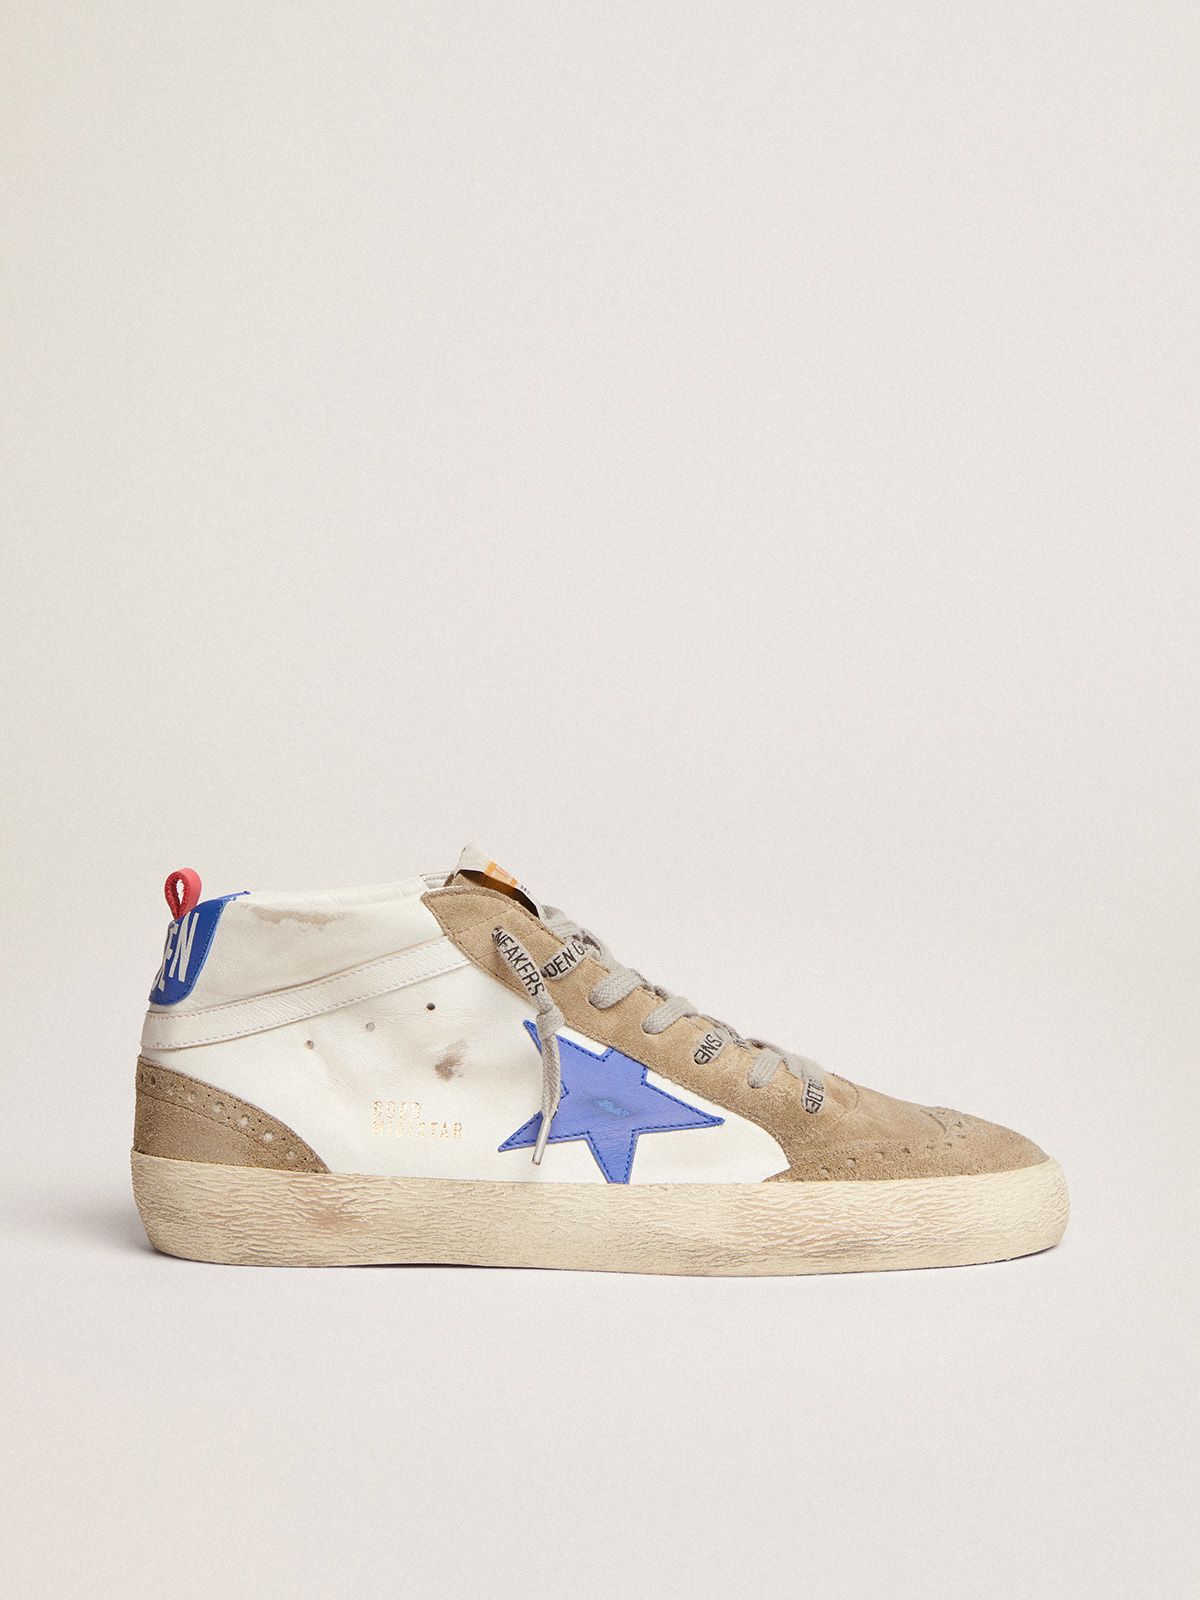 Mid Star sneakers in white leather with blue leather star and dove-gray suede inserts | 